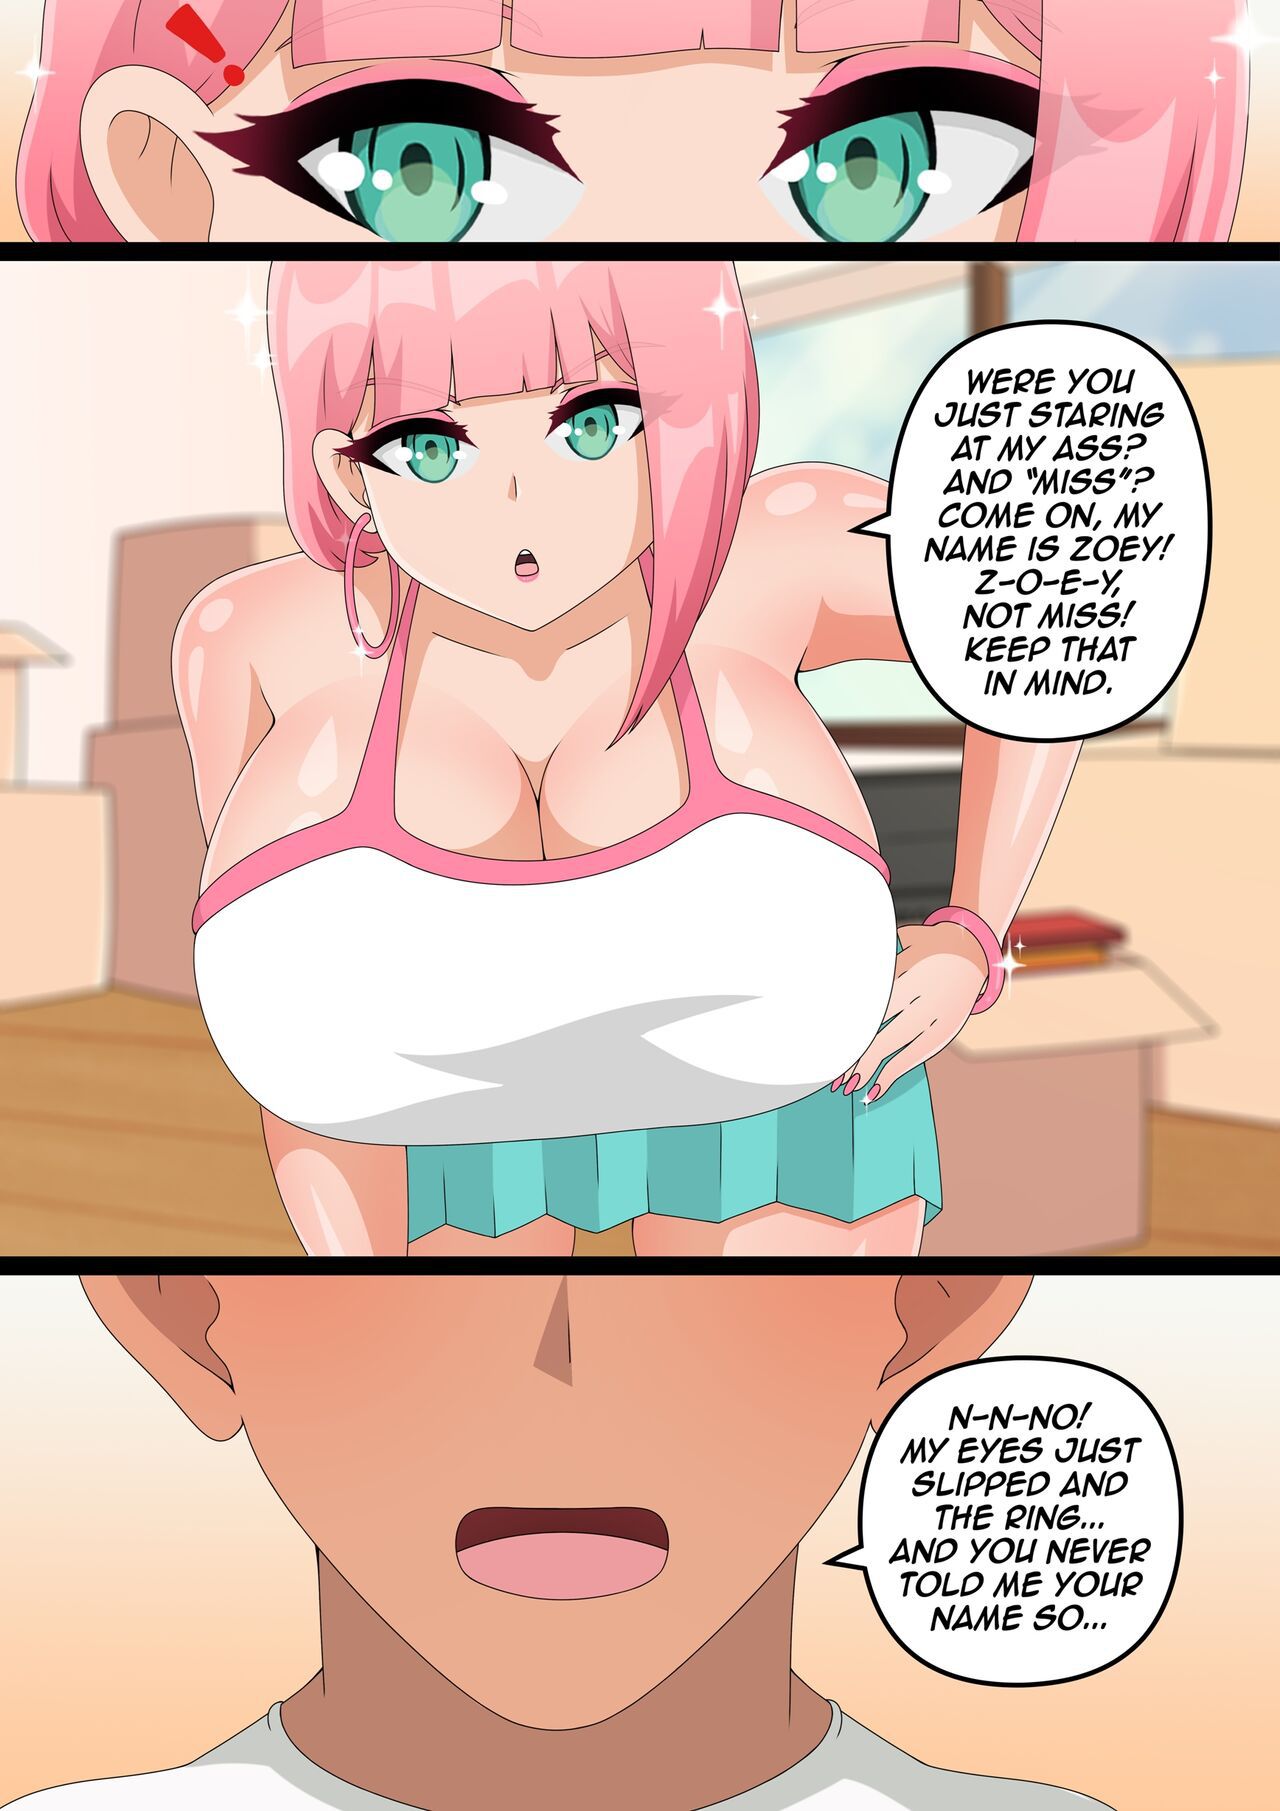 Zoey The Love Story [page 24 added] 14